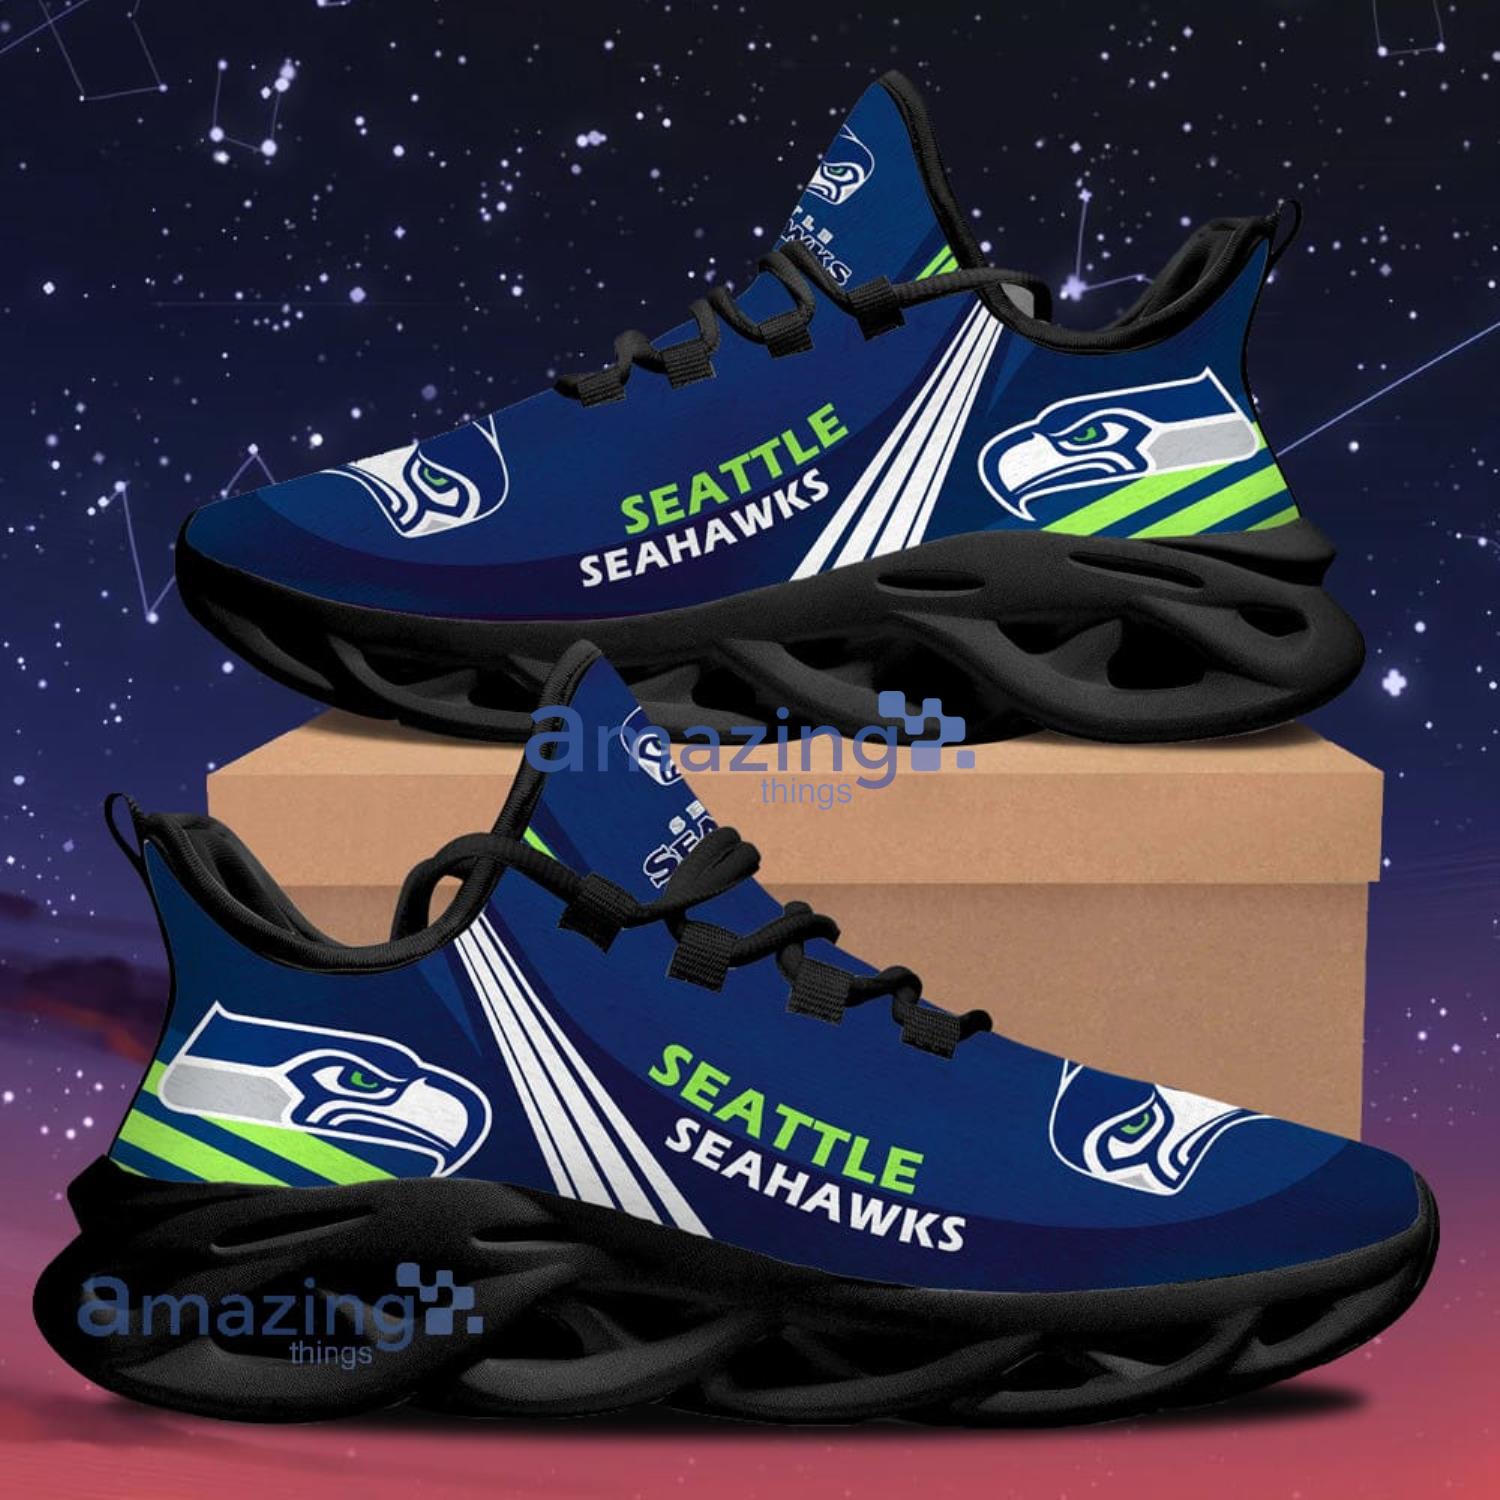 Seattle Seahawks New Trend Max Soul Shoes Running Sneakers Product Photo 1